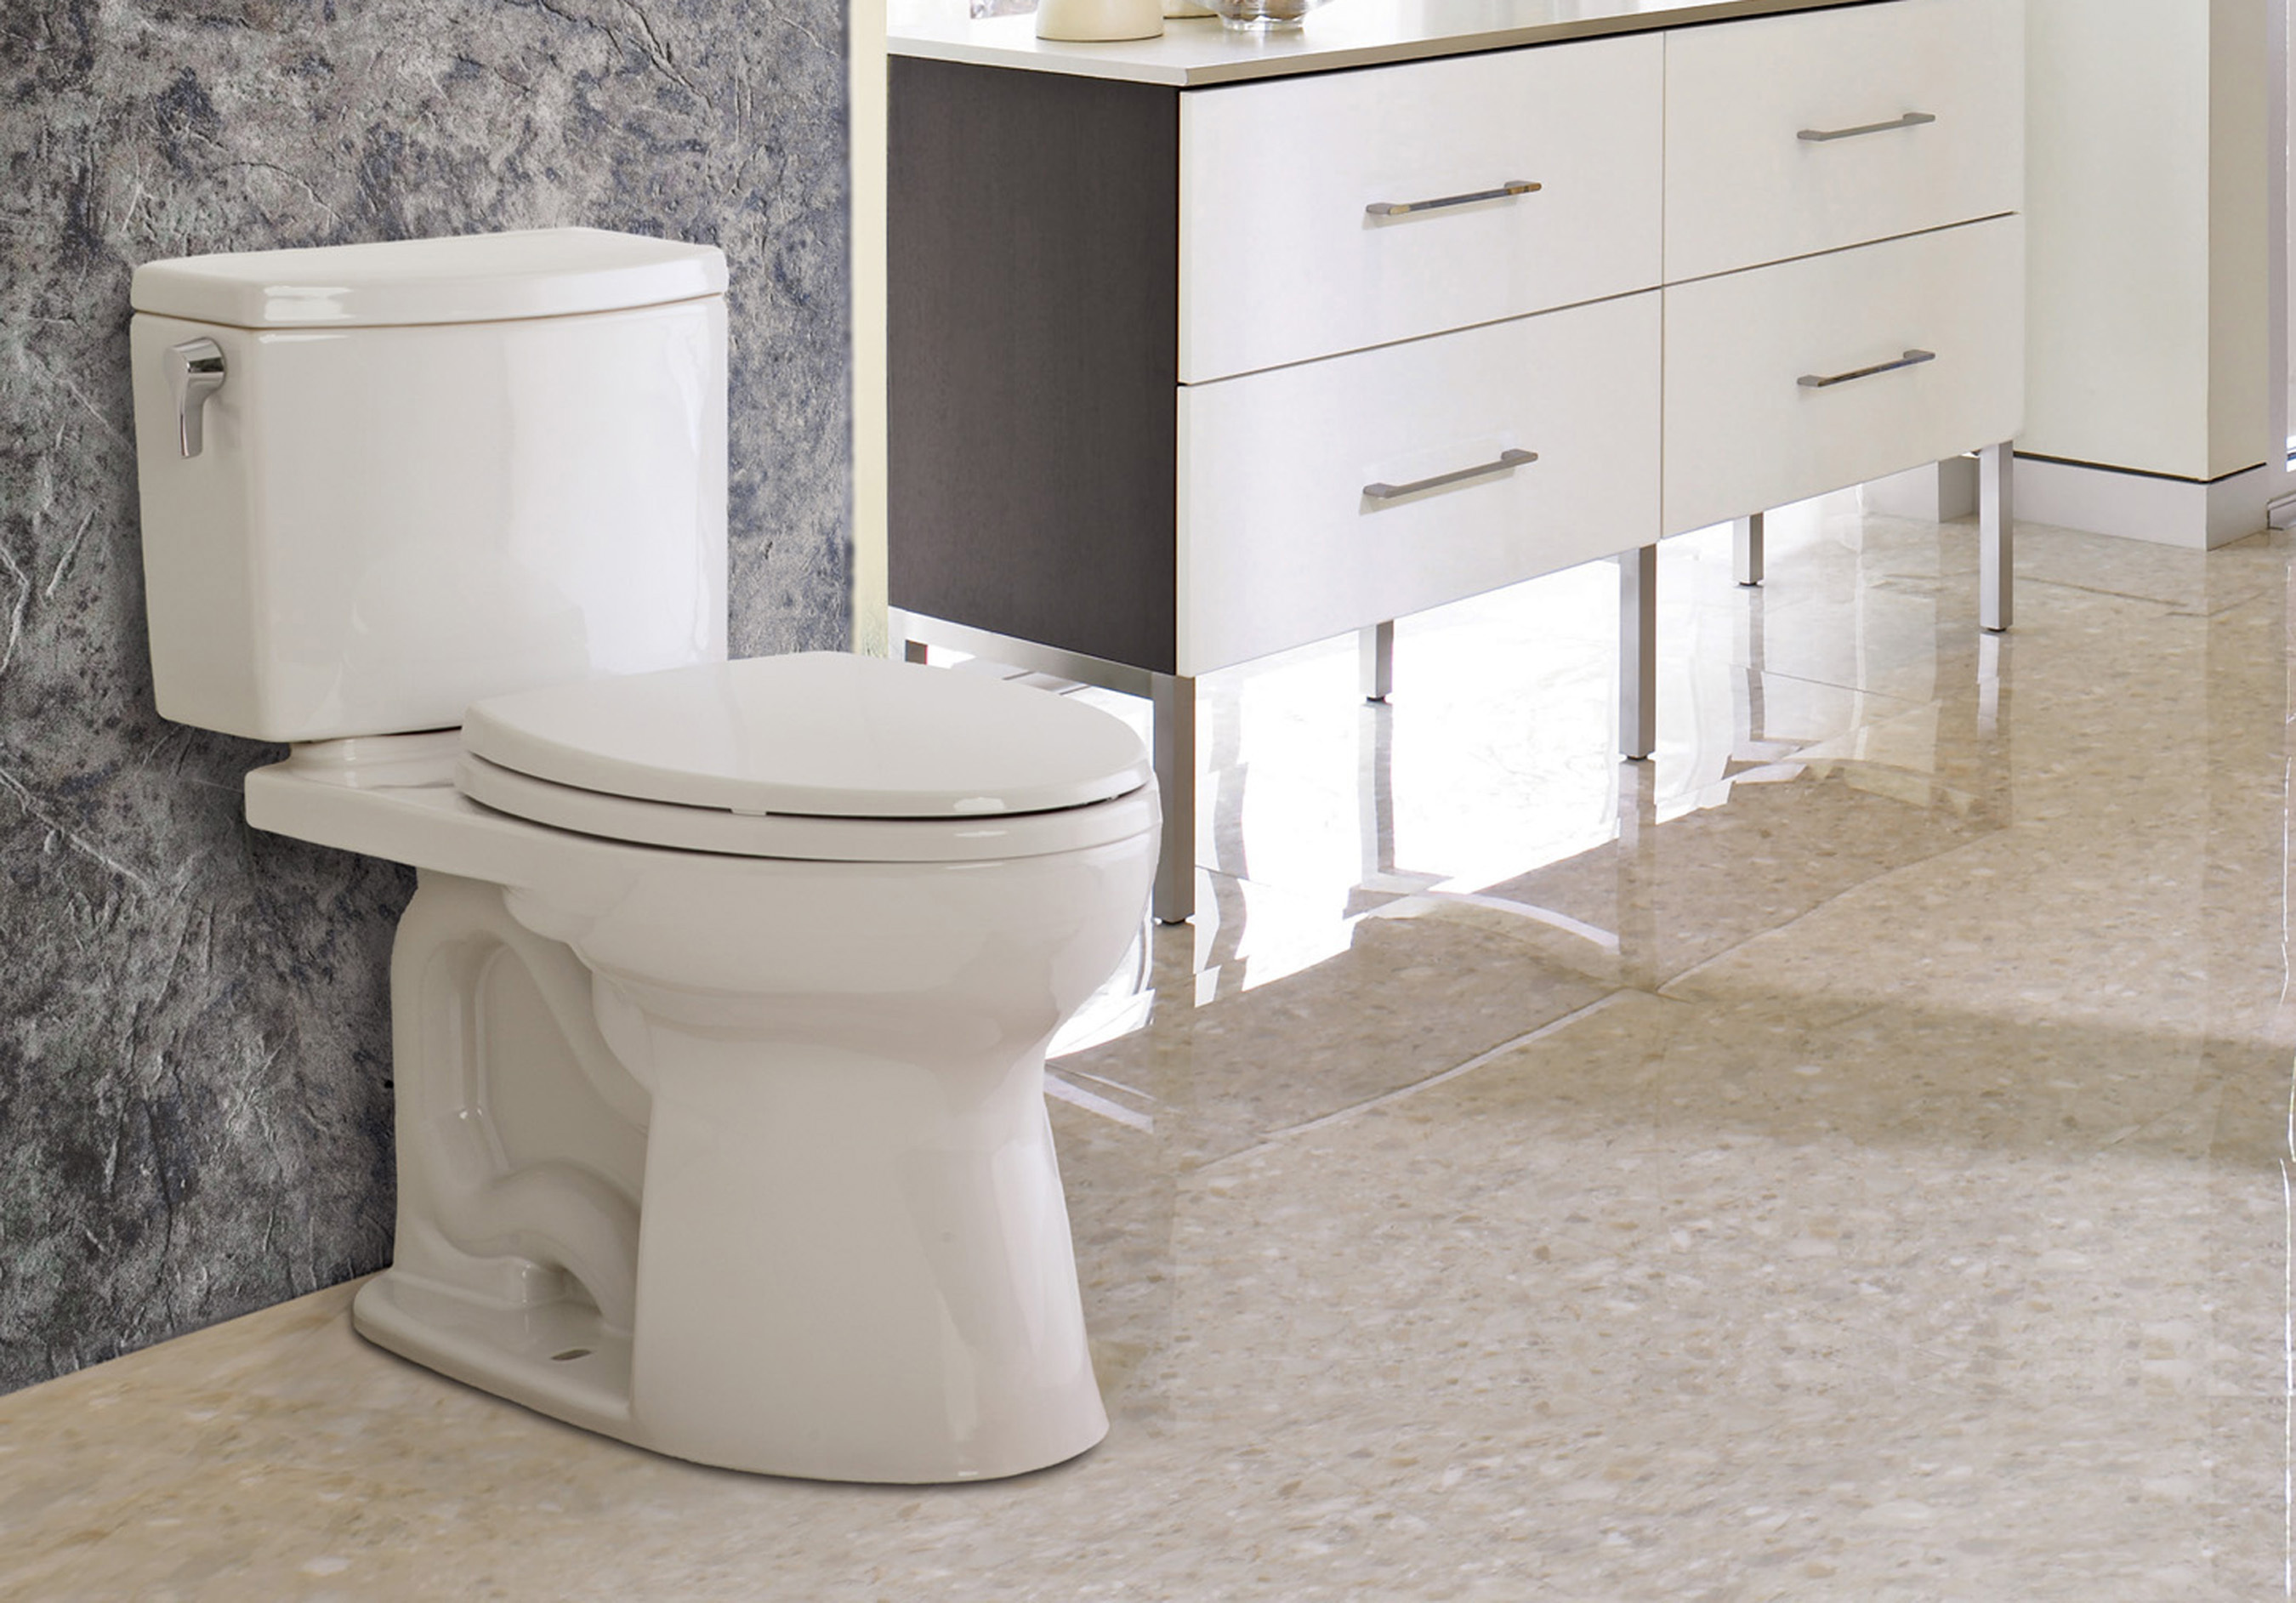 TOTO is the first plumbing manufacturer to validate its products' environmental performance with new Sustainable Minds' Transparency Reports. The company's Drake II 1G is one of its first ultra-high efficiency toilets for which a new SM Transparency Report has been developed. (PRNewsFoto/TOTO USA) (PRNewsFoto/TOTO USA)